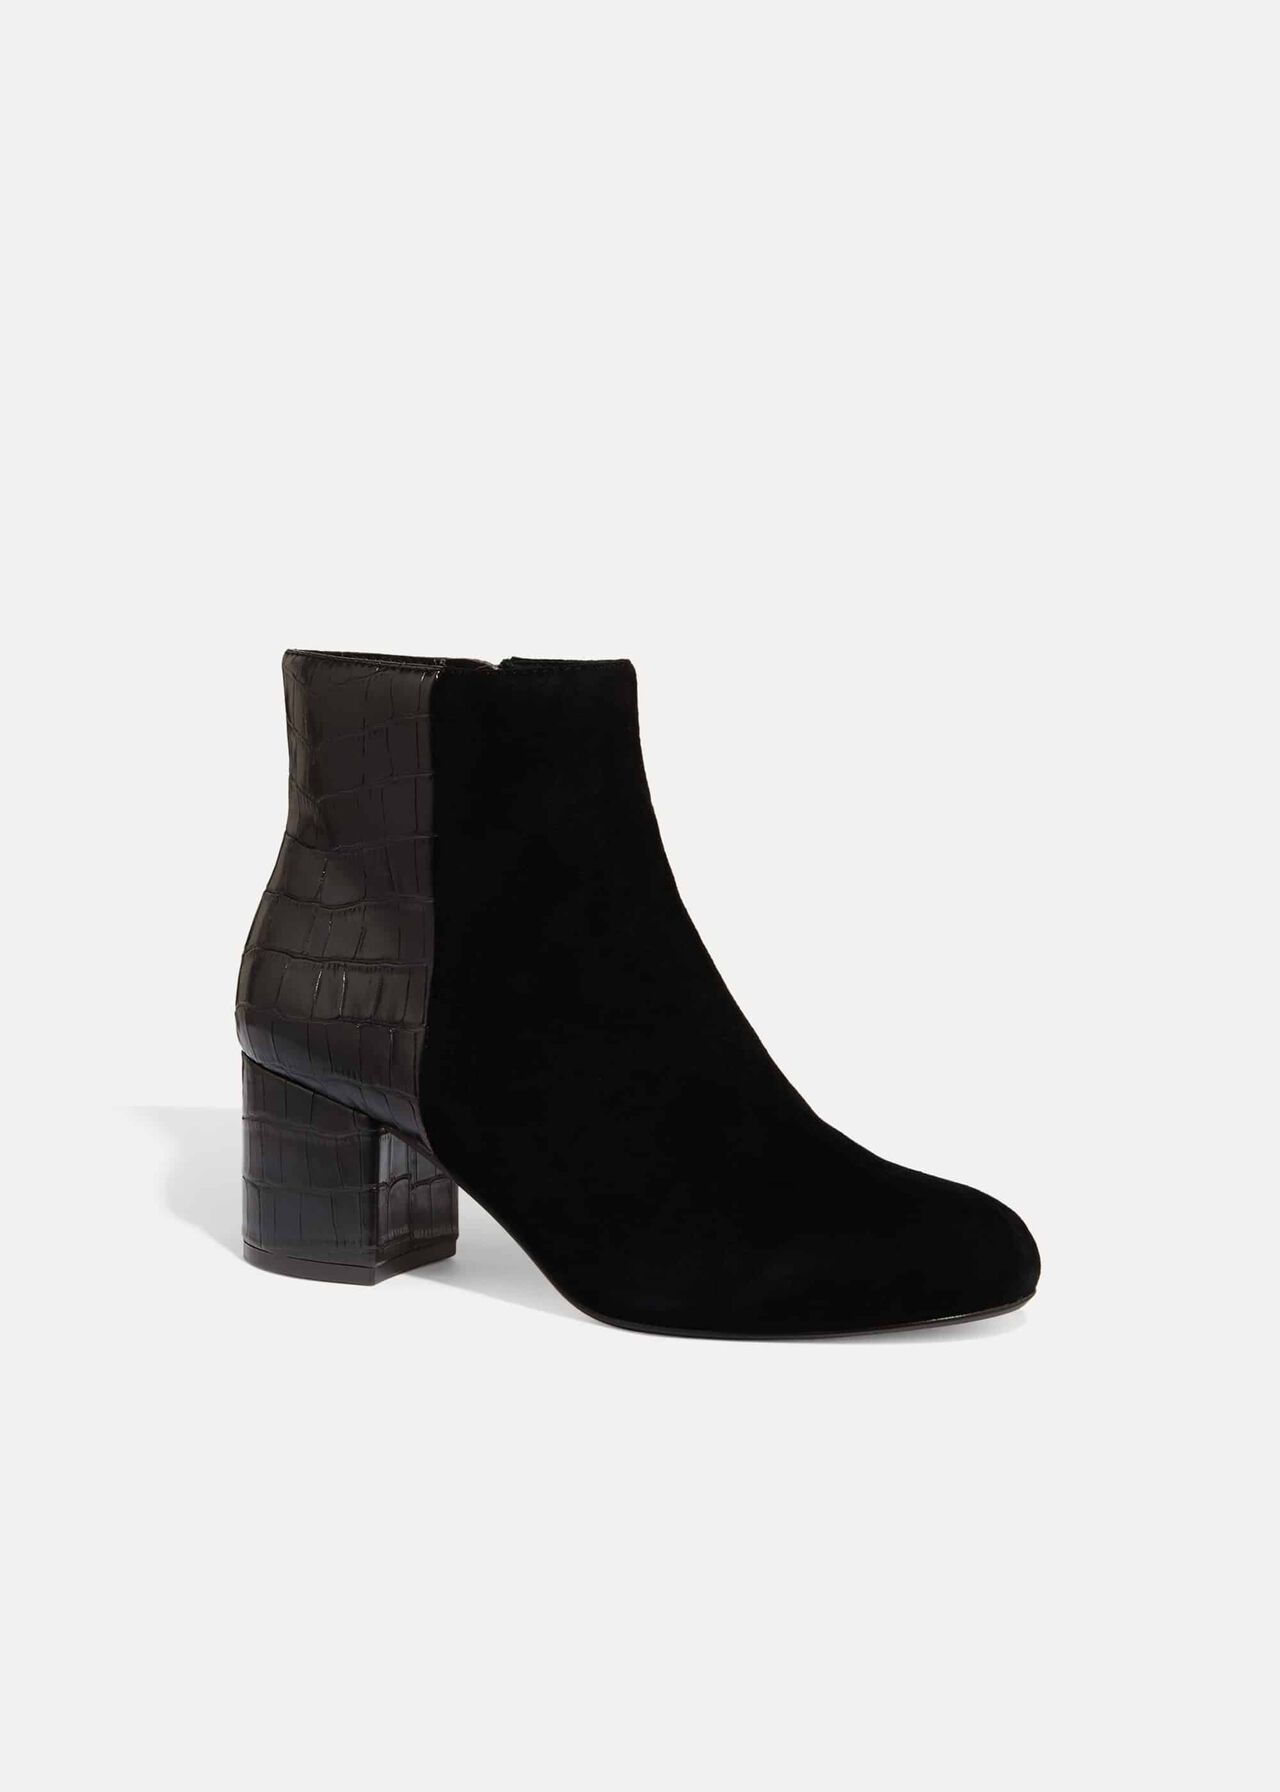 Helena Croc Ankle Boot